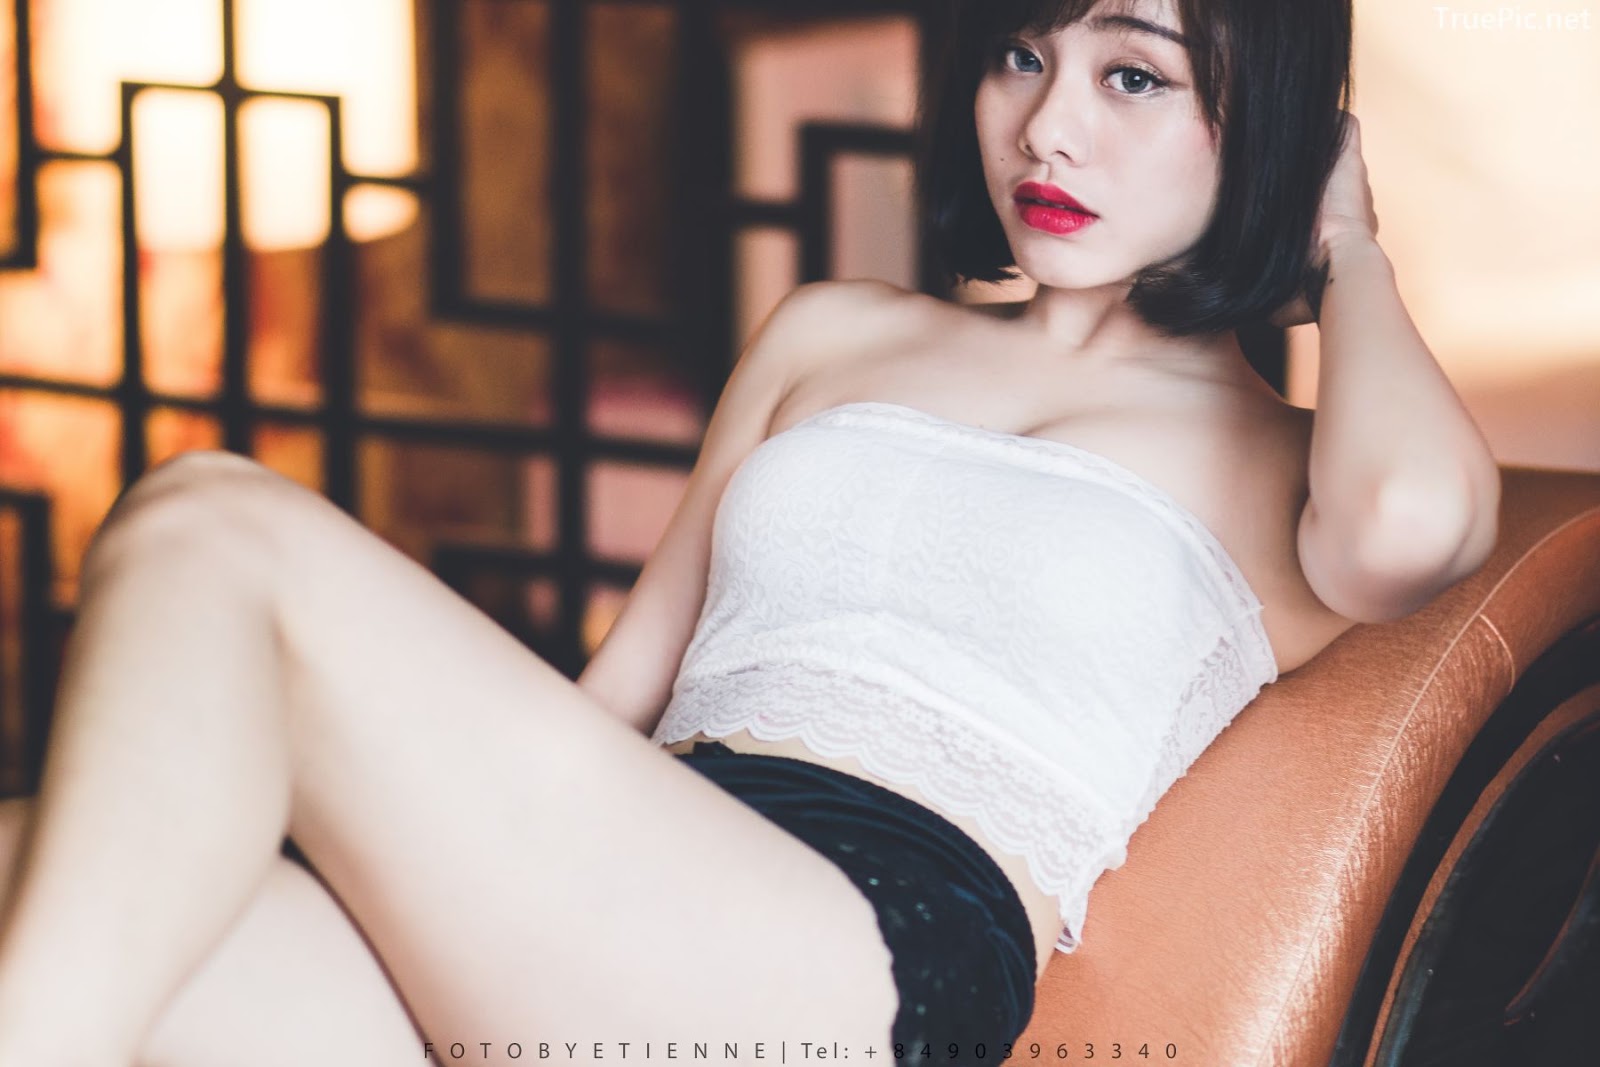 Super hot photos of Vietnamese beauties with lingerie and bikini - Photo by Le Blanc Studio - Part 2 - Picture 42